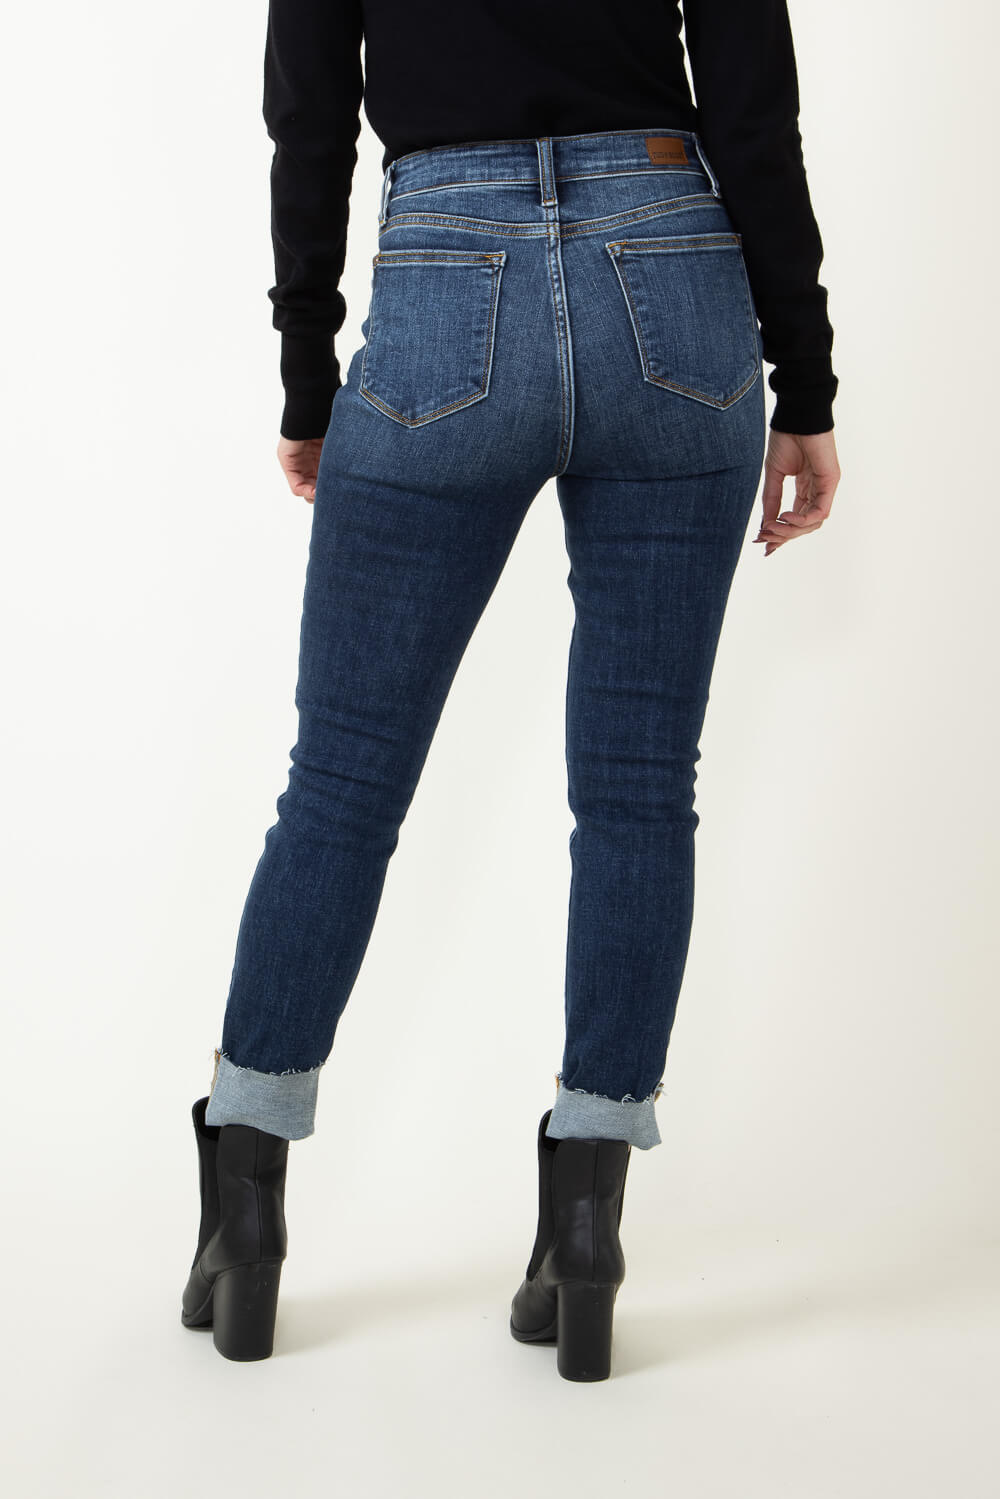 Judy Blue High Rise Button Fly Cut Off Skinny Jeans for Women